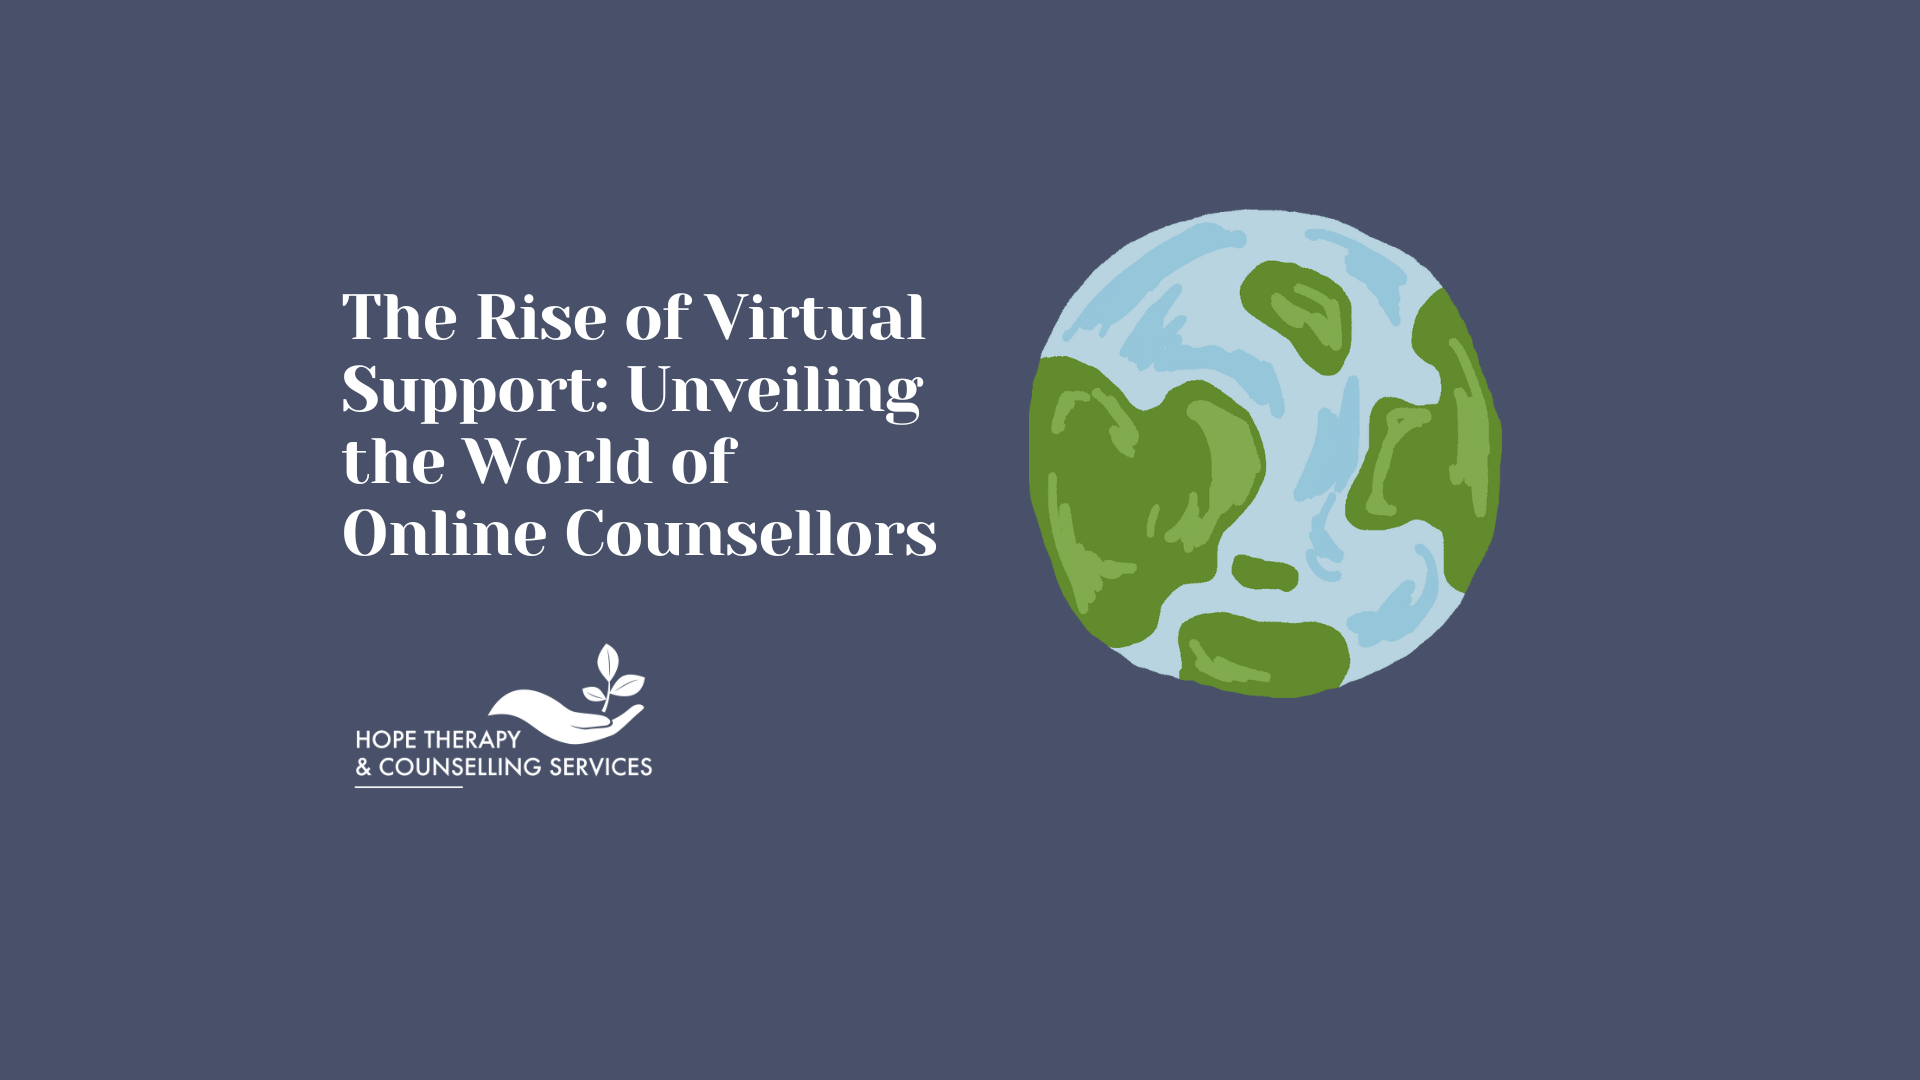 Explore the growing realm of virtual support through online counselors, revolutionizing access to mental health services and fostering well-being in the digital age.